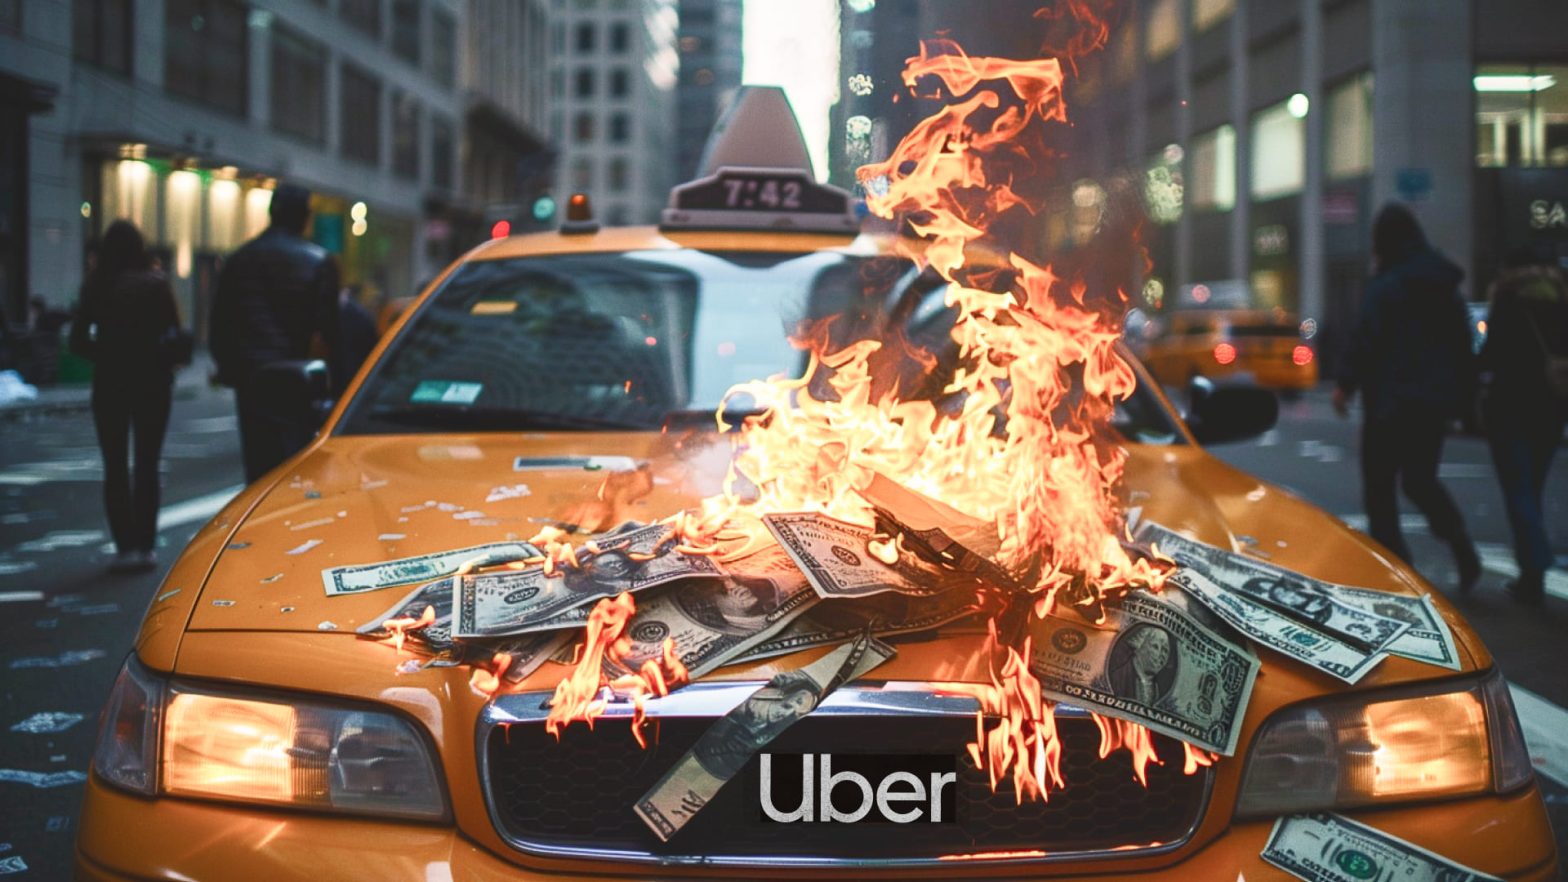 How Uber Wasted Millions on Useless Digital Ads